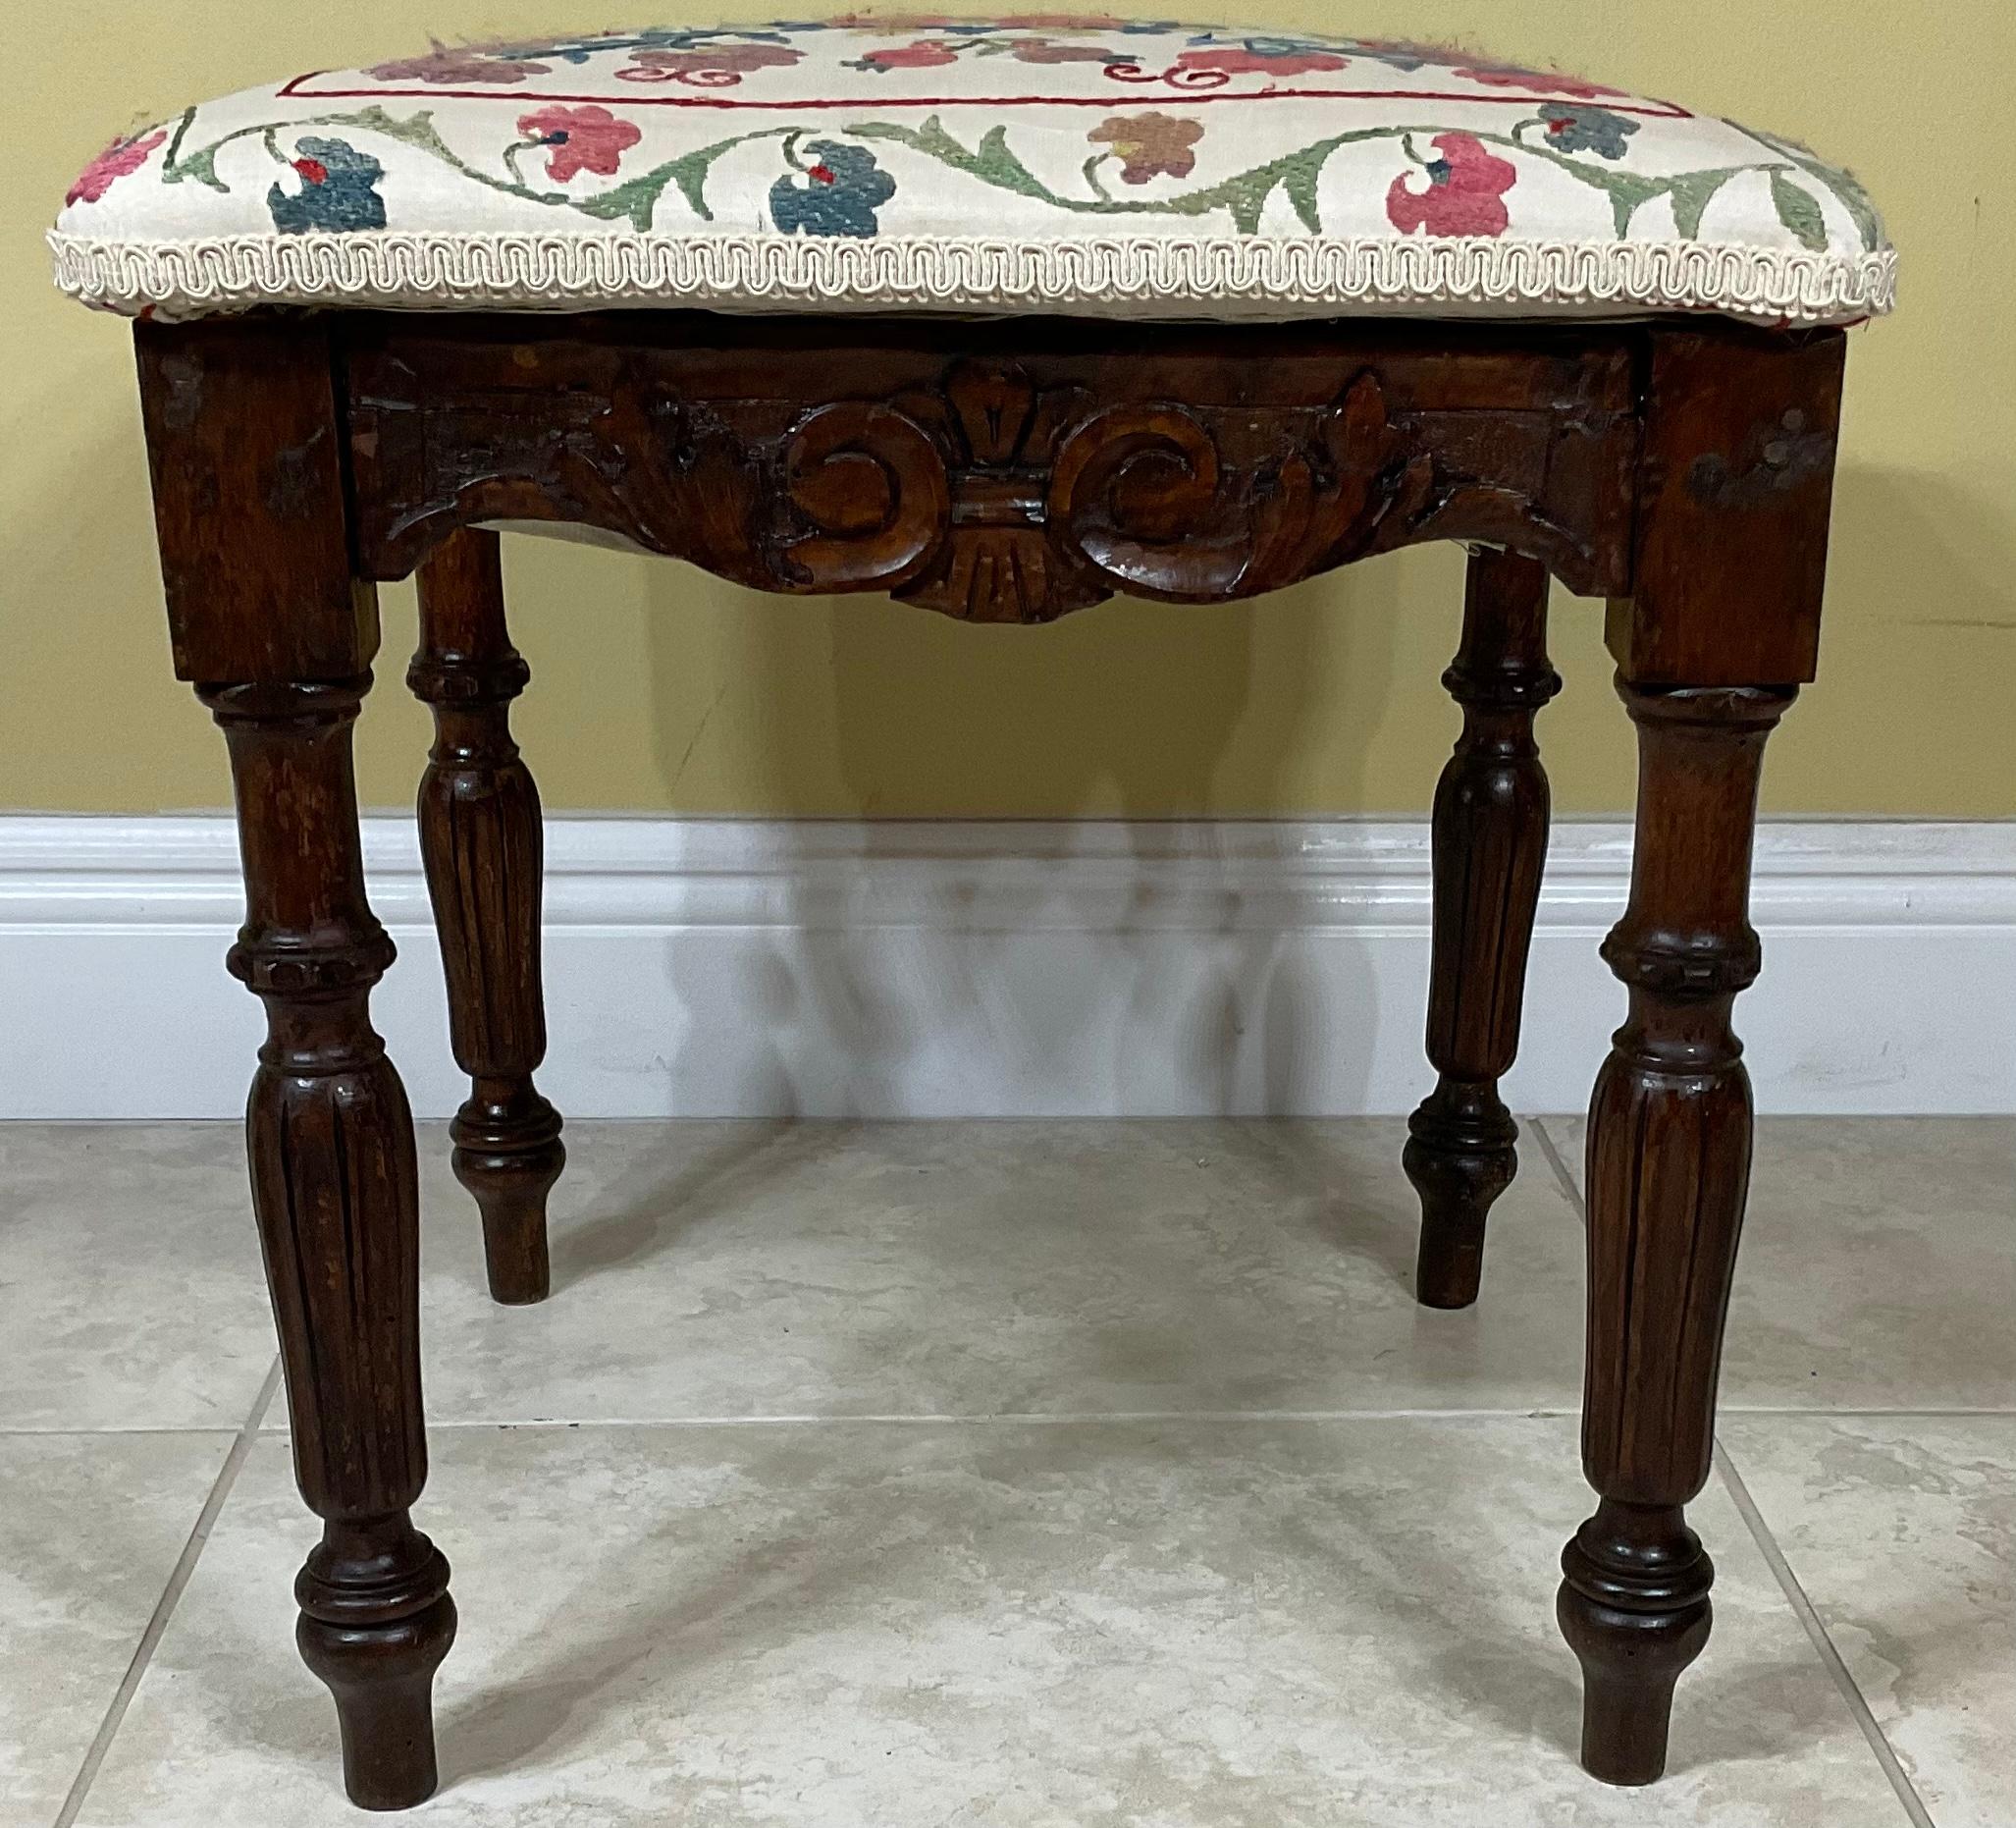 American Vintage Hand Embroidery Suzani Textile Upholstered Low Stool